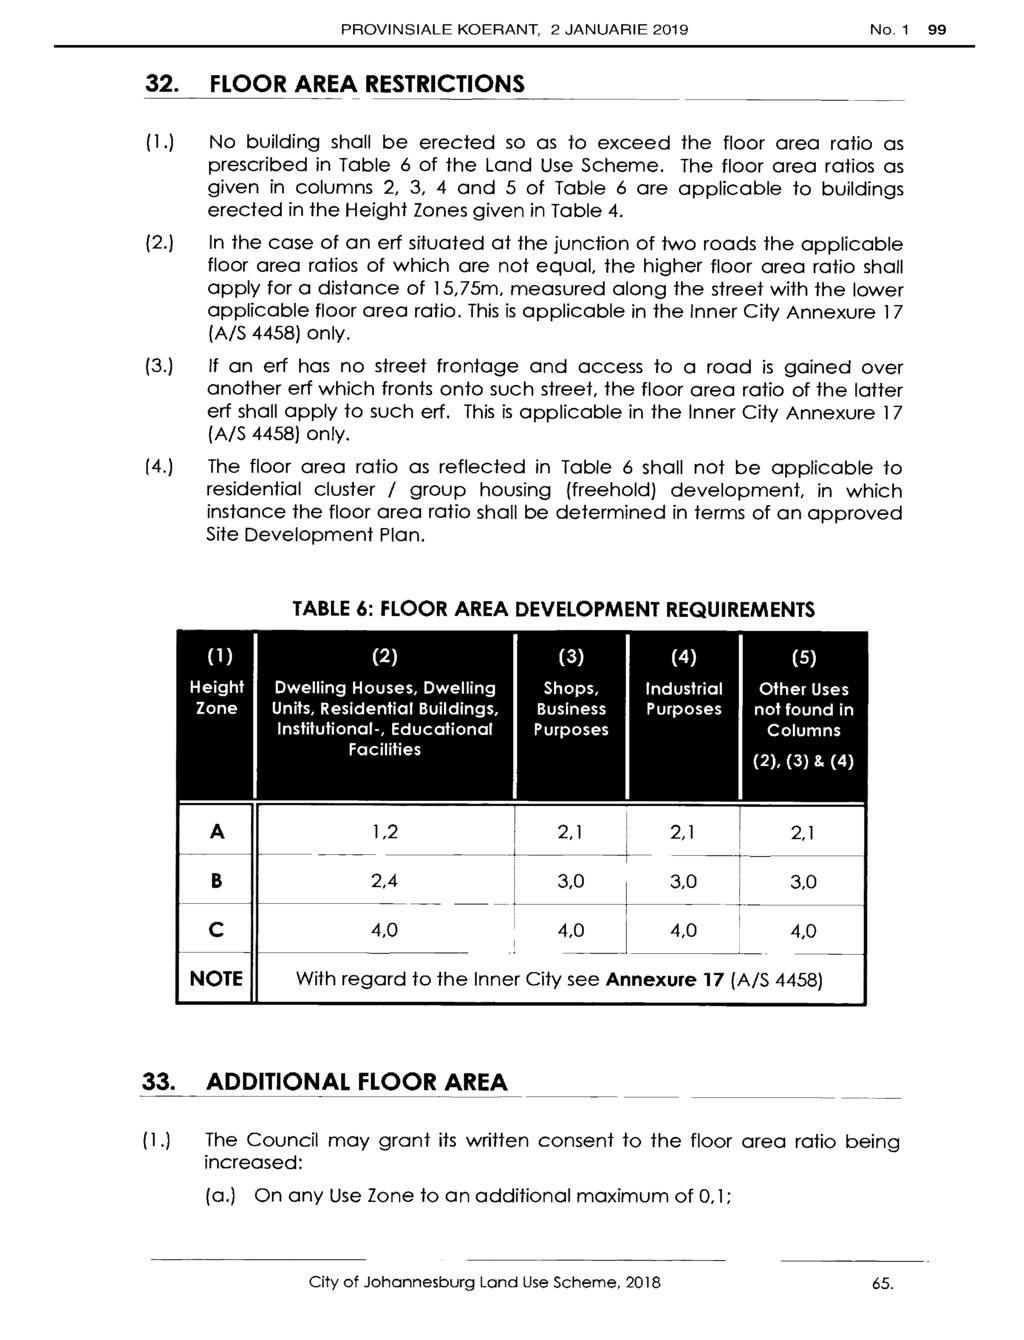 PROVNSALE KOERANT, 2 JANUARE 2019 No.1 99 32. FLOOR AREA RESTRCTONS (1.) No building shall be erected so as to exceed the floor area ratio as prescribed in Table 6 of the Land Use Scheme.